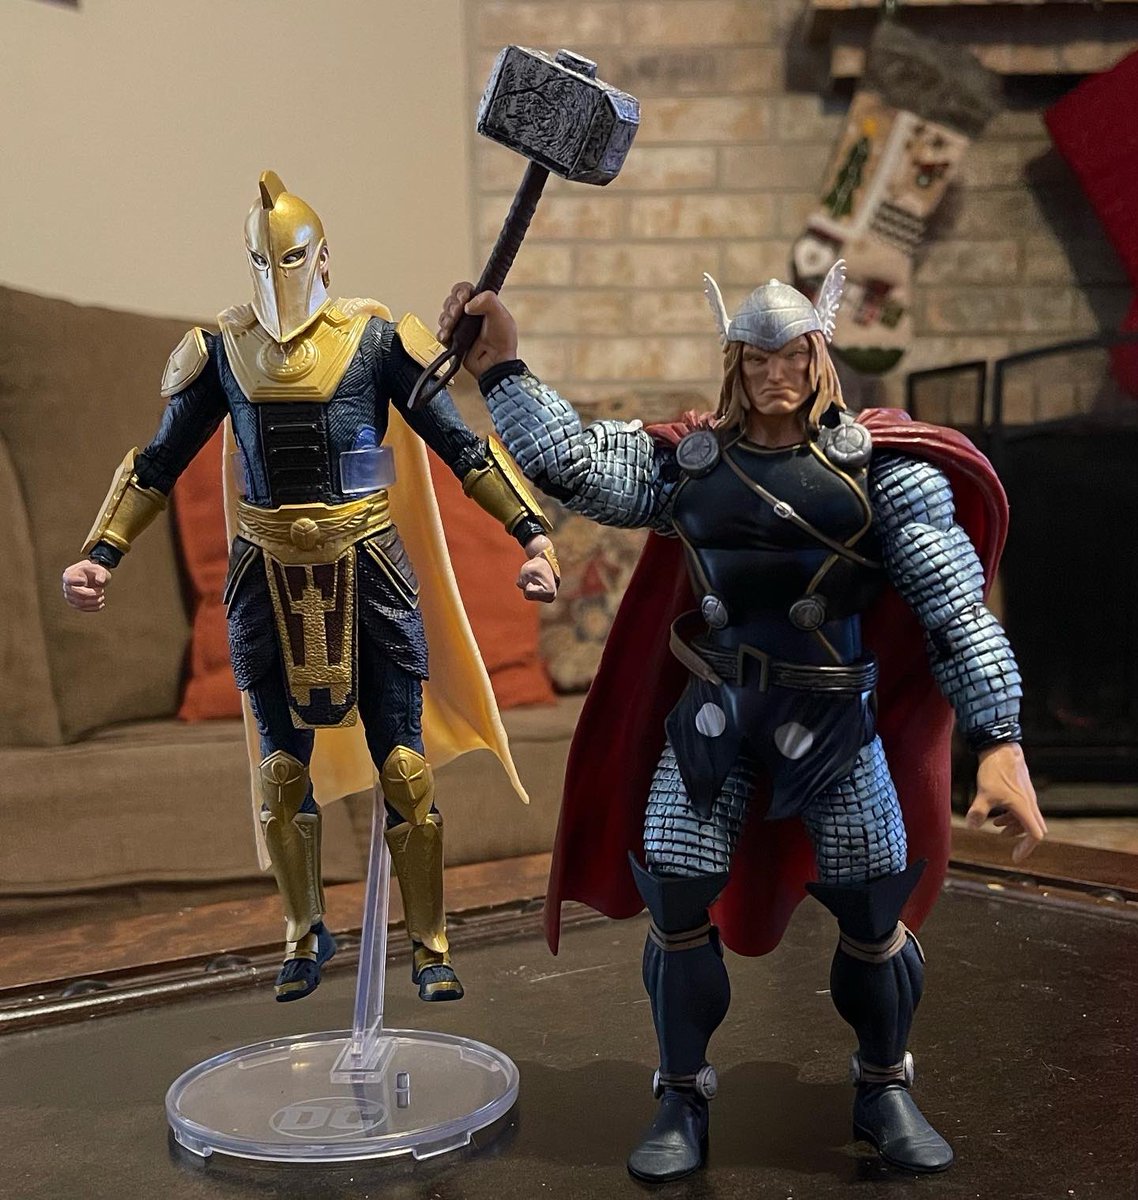 Thor with Dr. Fate and Thor with Cyclops. 
#Thor
#DrFate
#Cyclops
#DCComics
#MarvelComics
#ActionFigures https://t.co/UvAuX3bXUG